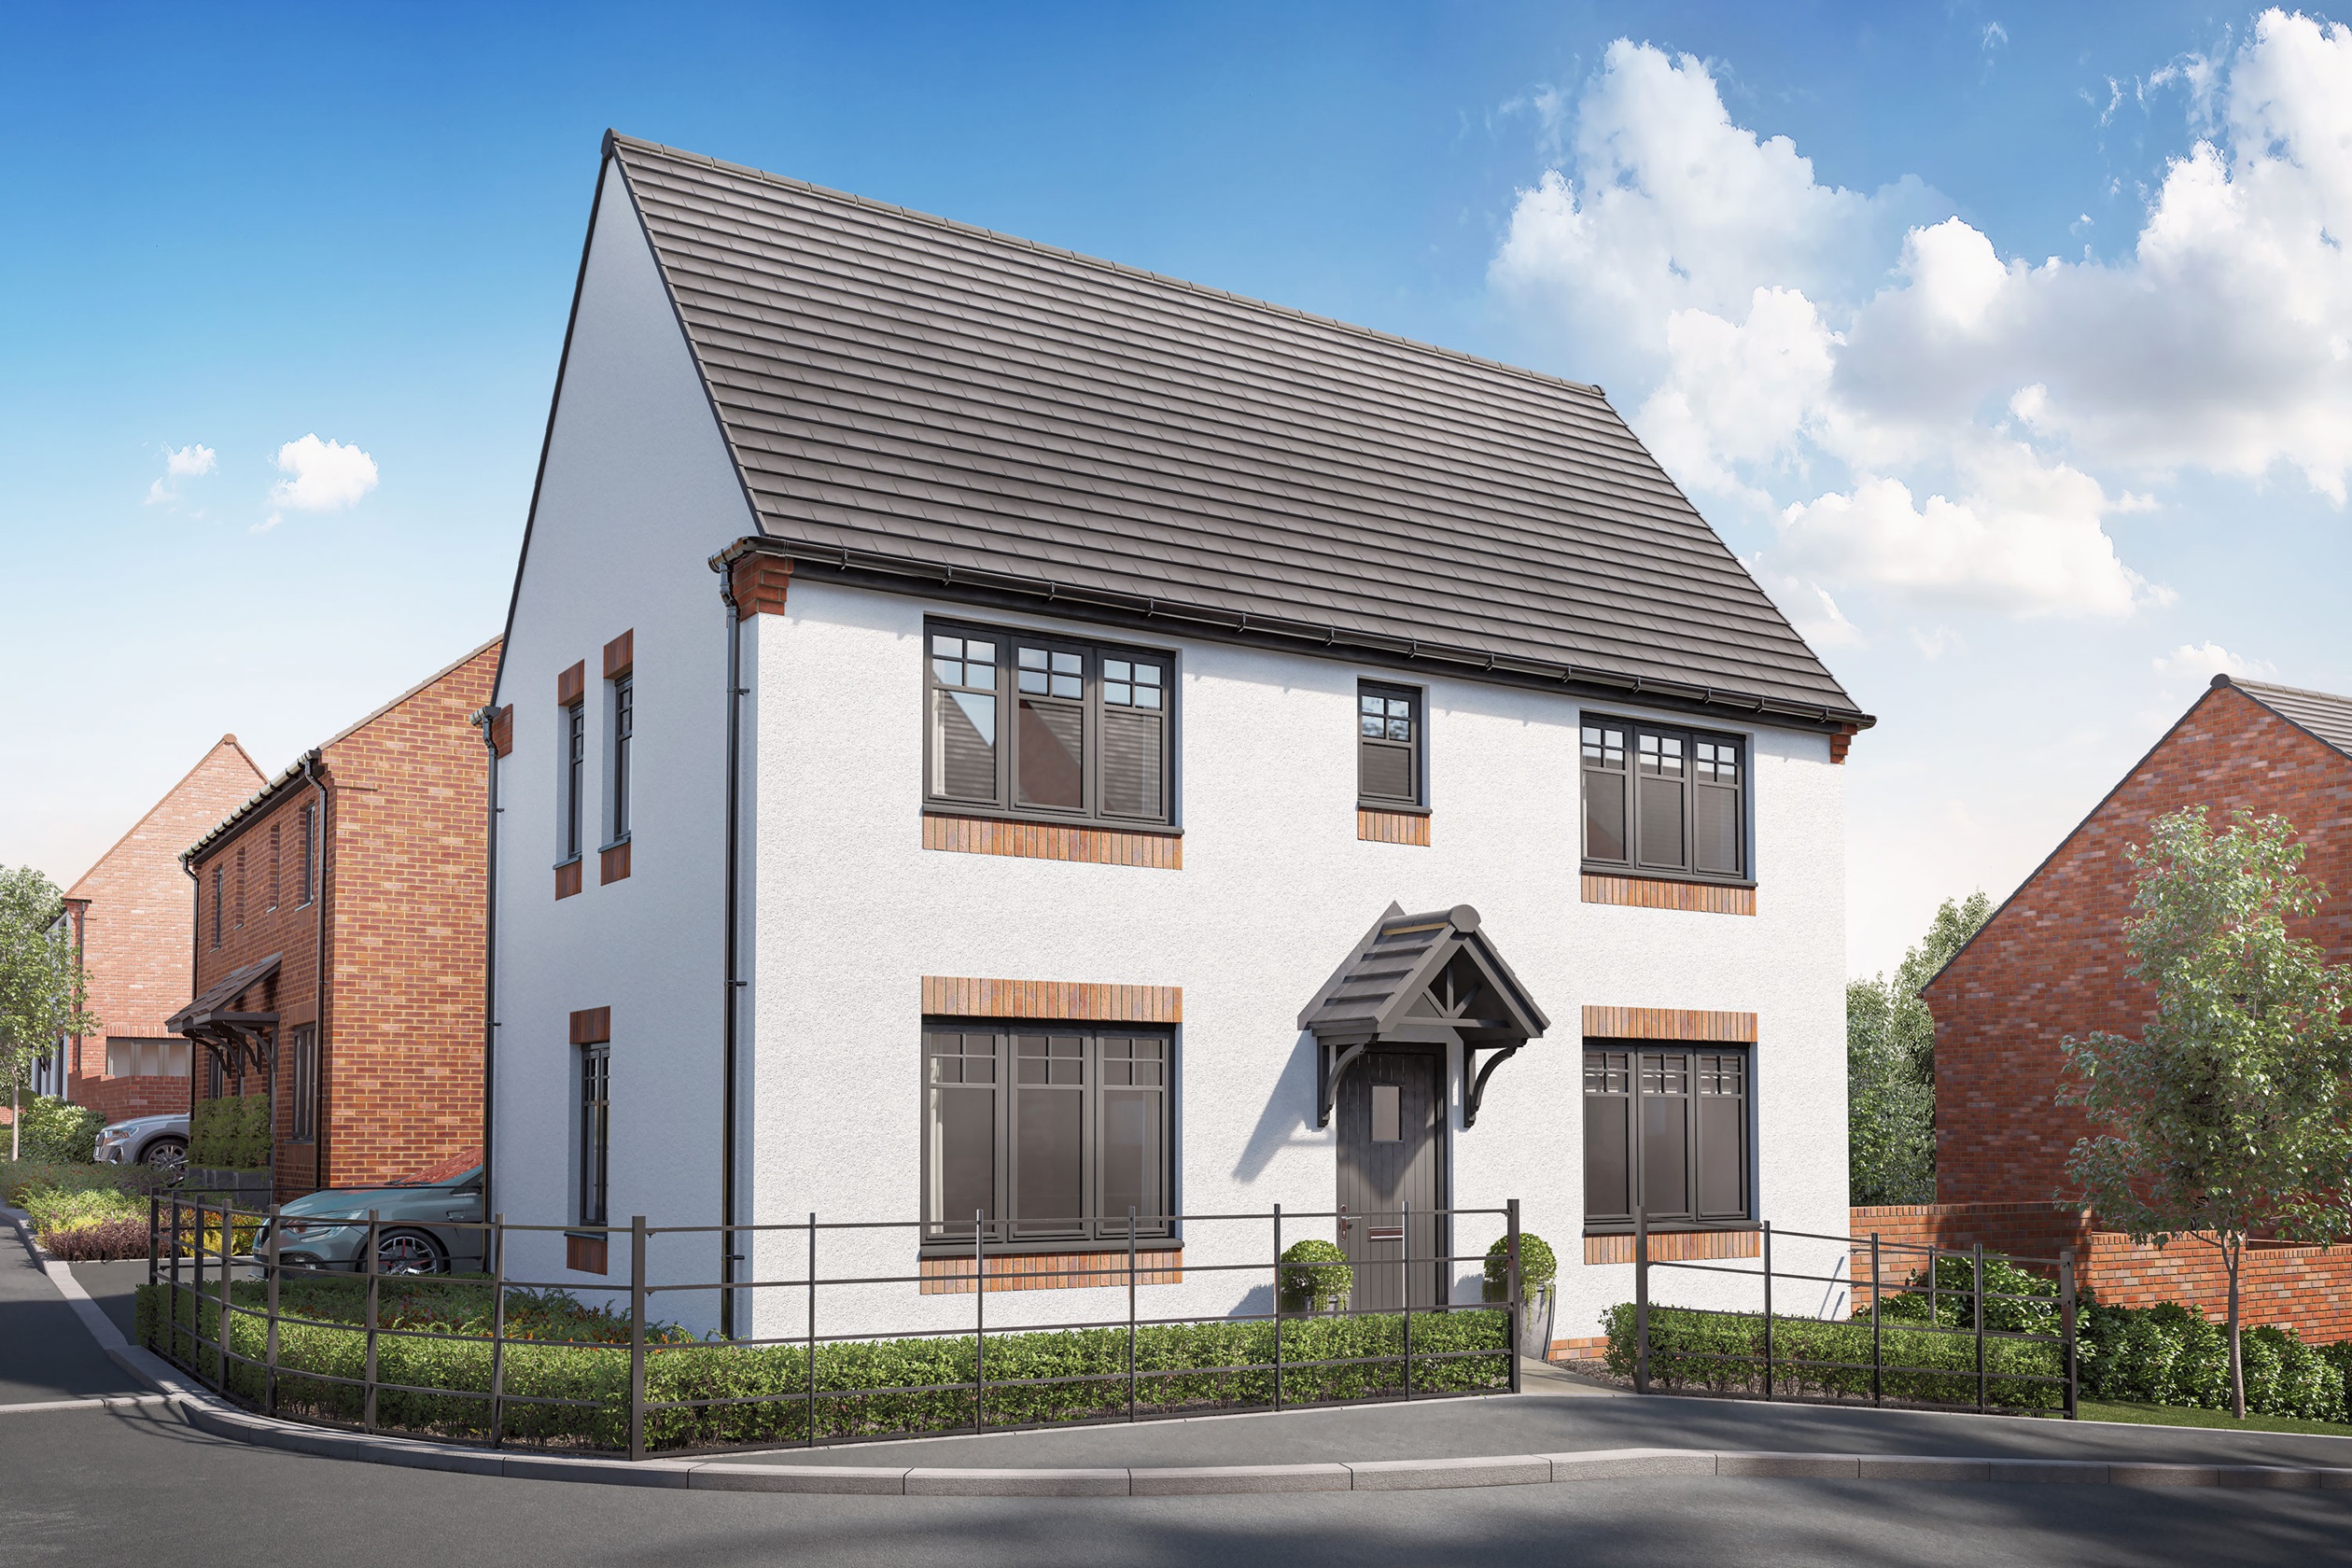 Property 1 of 10. Exterior CGI View Of Our 3 Bed Ennerdale Home